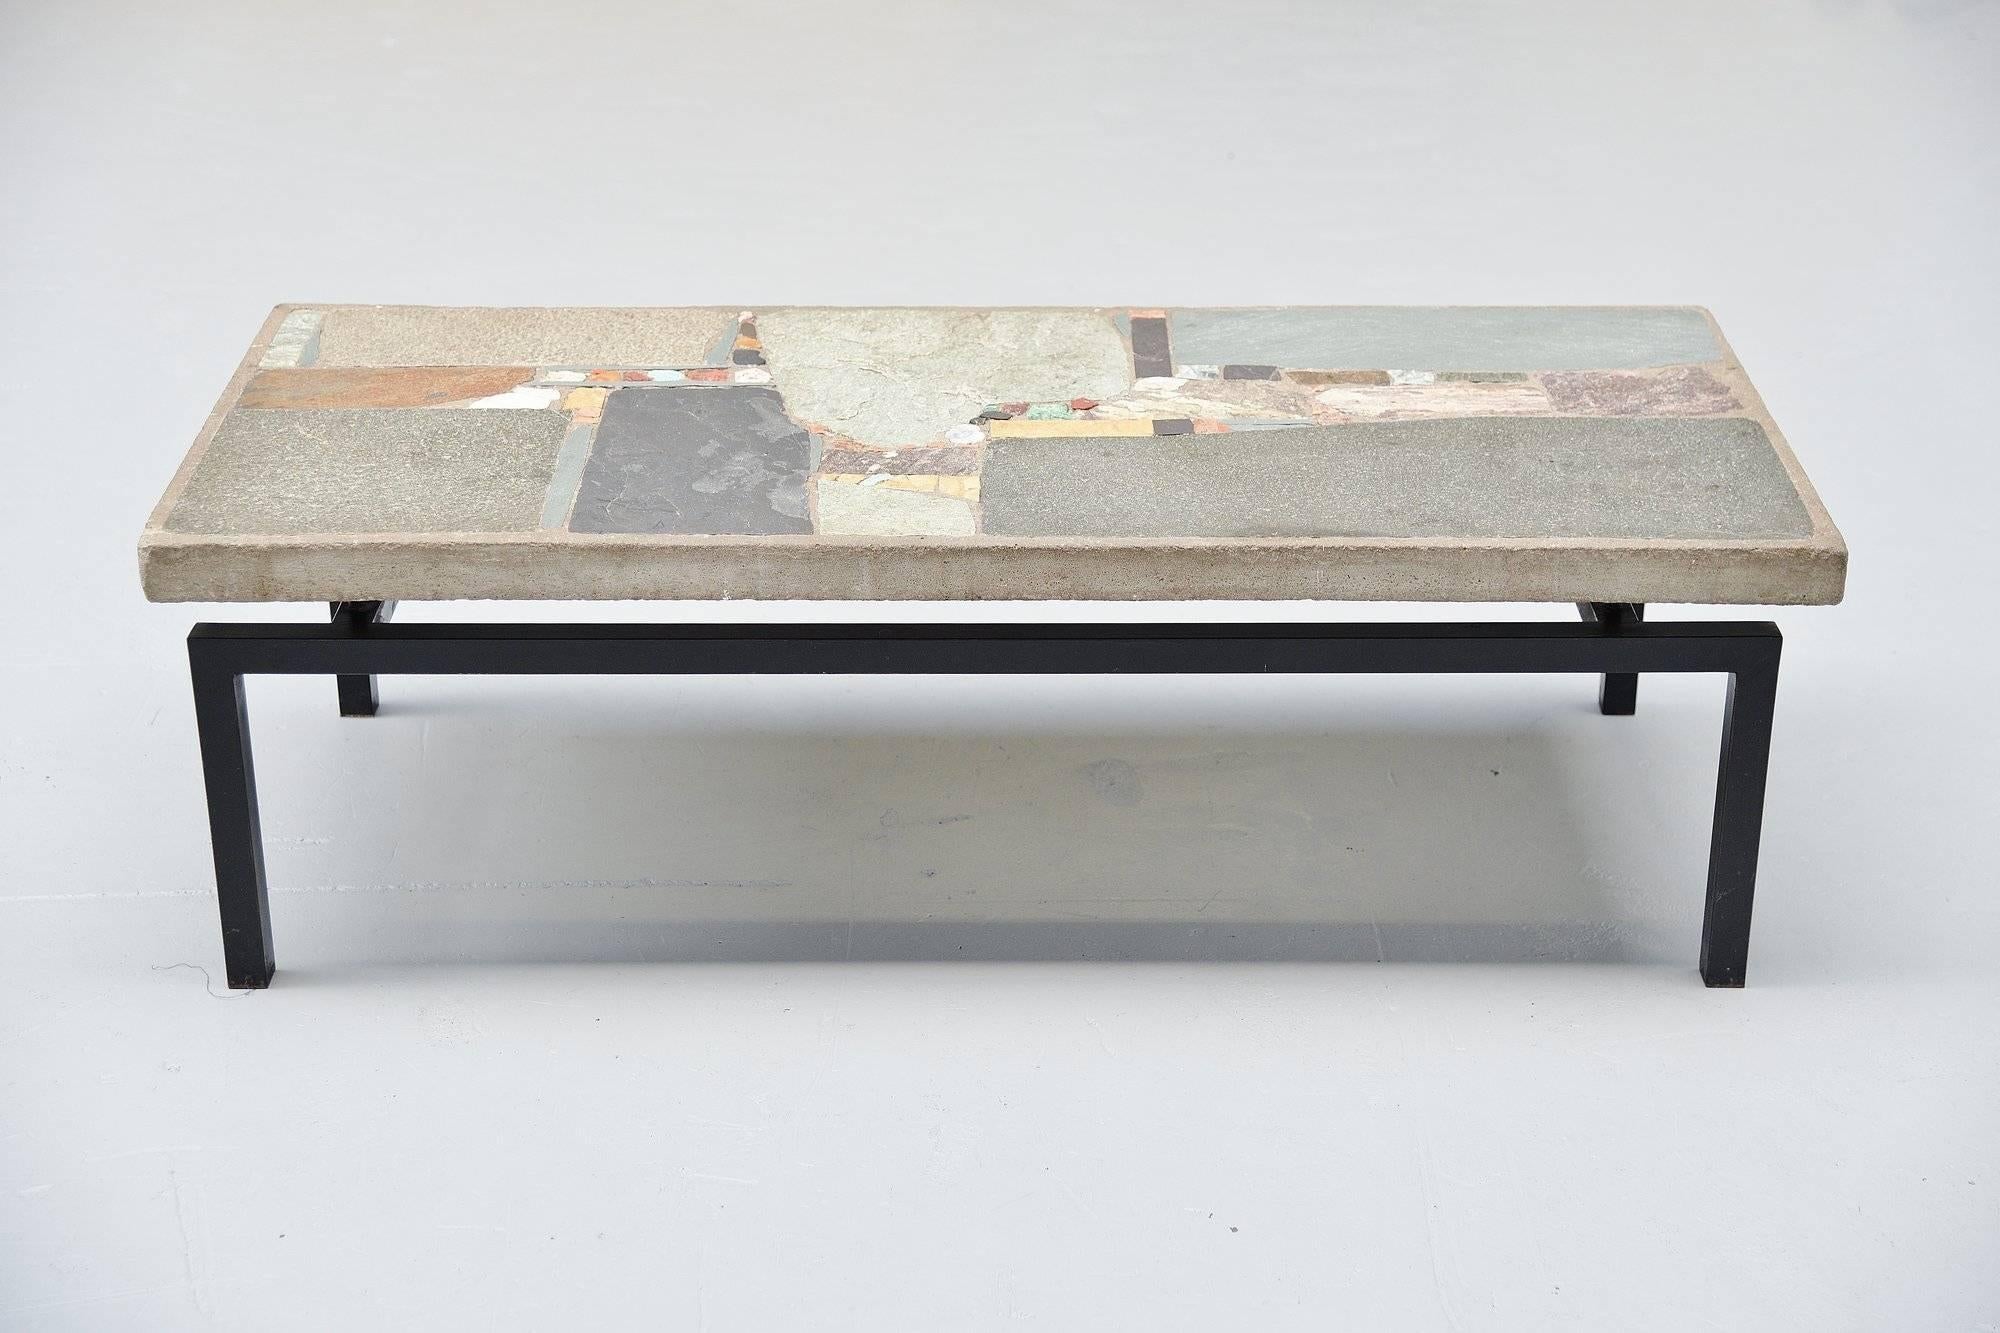 Cold-Painted Rien Goené Abstract Coffee Table, 1958